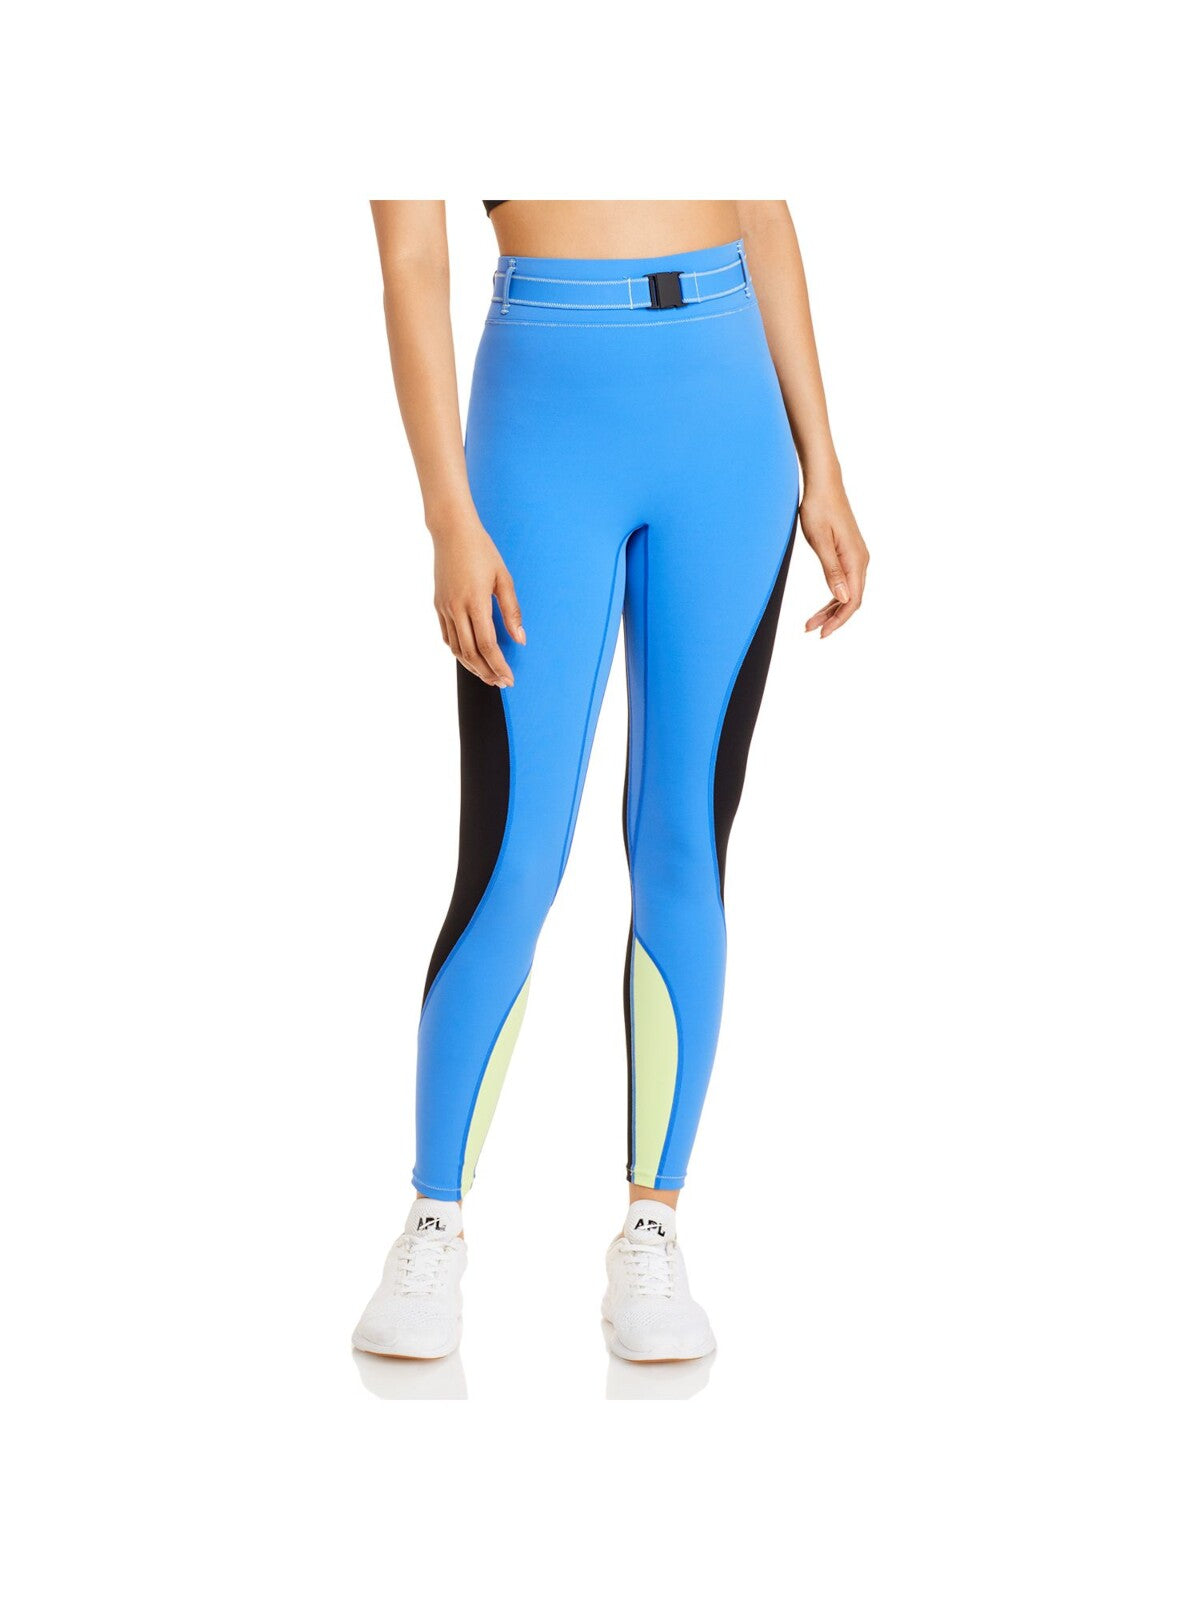 SOLID & STRIPED SPORT Womens Blue Stretch Fitted Belted Zipper Pouch Color Block Active Wear Skinny Leggings M